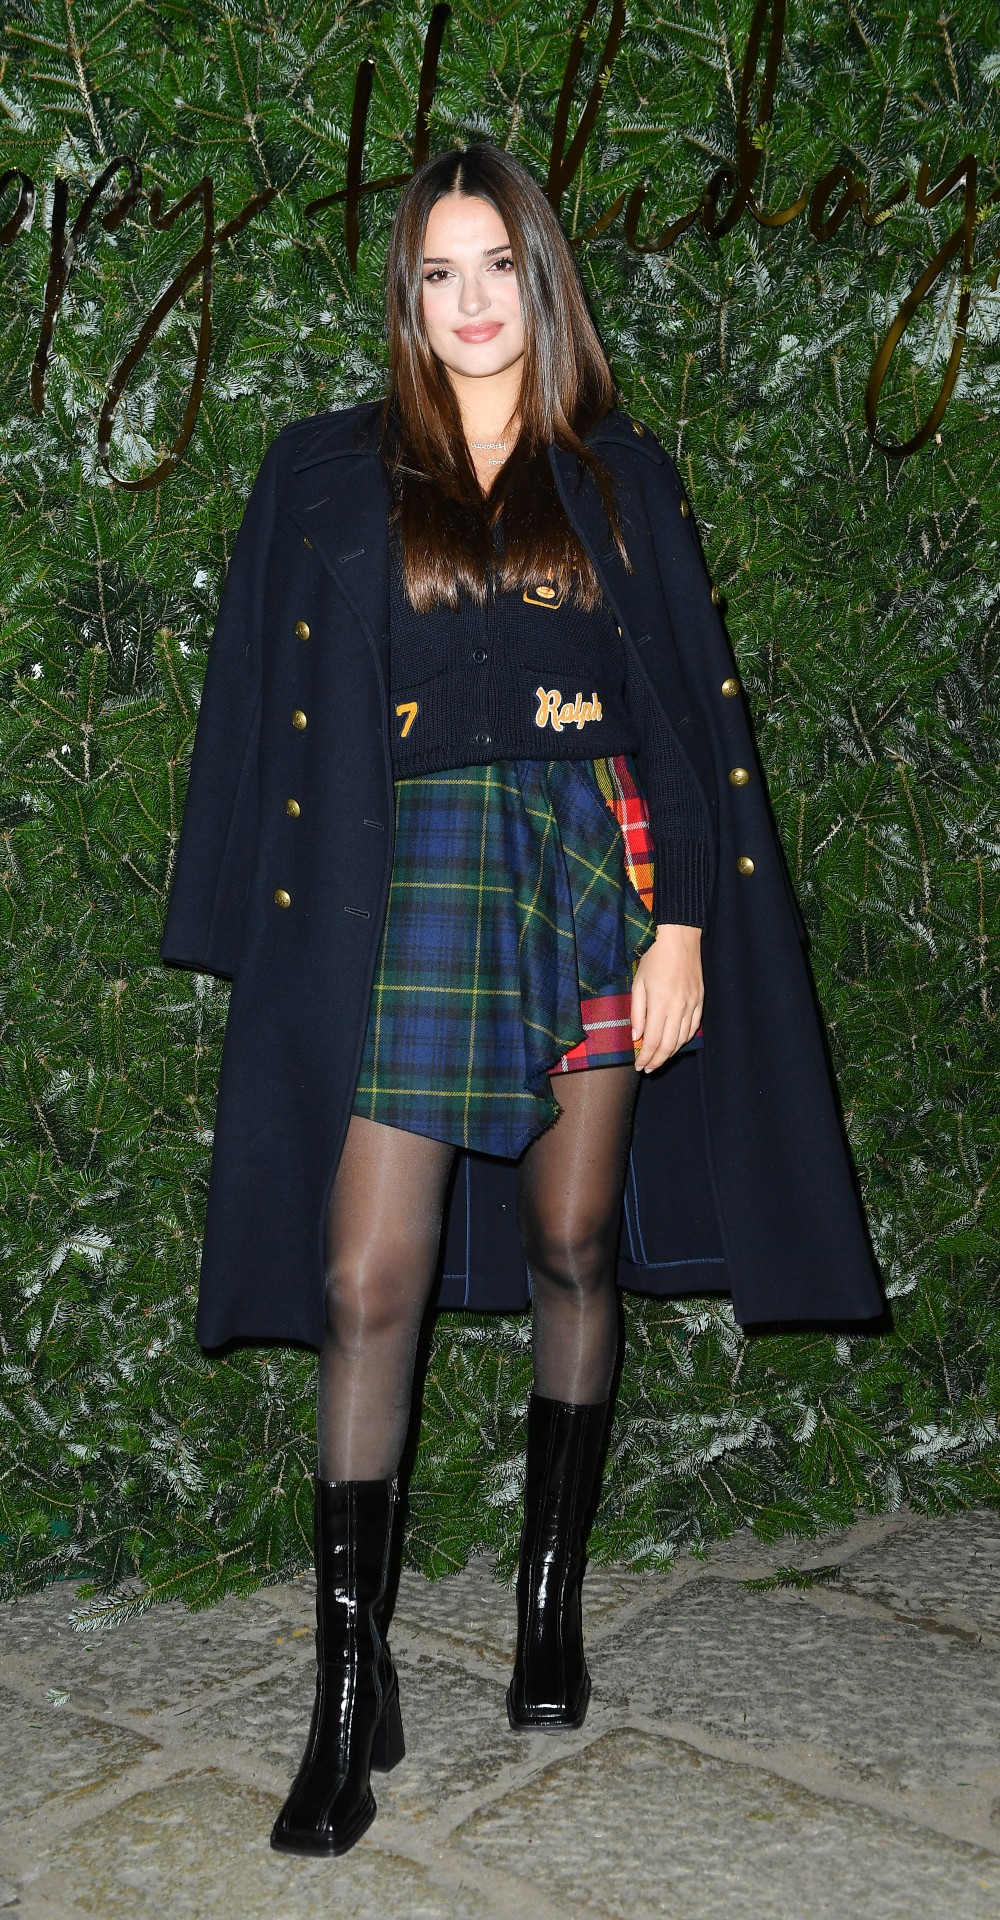 Gabrielle Caunesil attends Ralph Lauren New Flagship Store And Holiday Season Celebration getty (1)